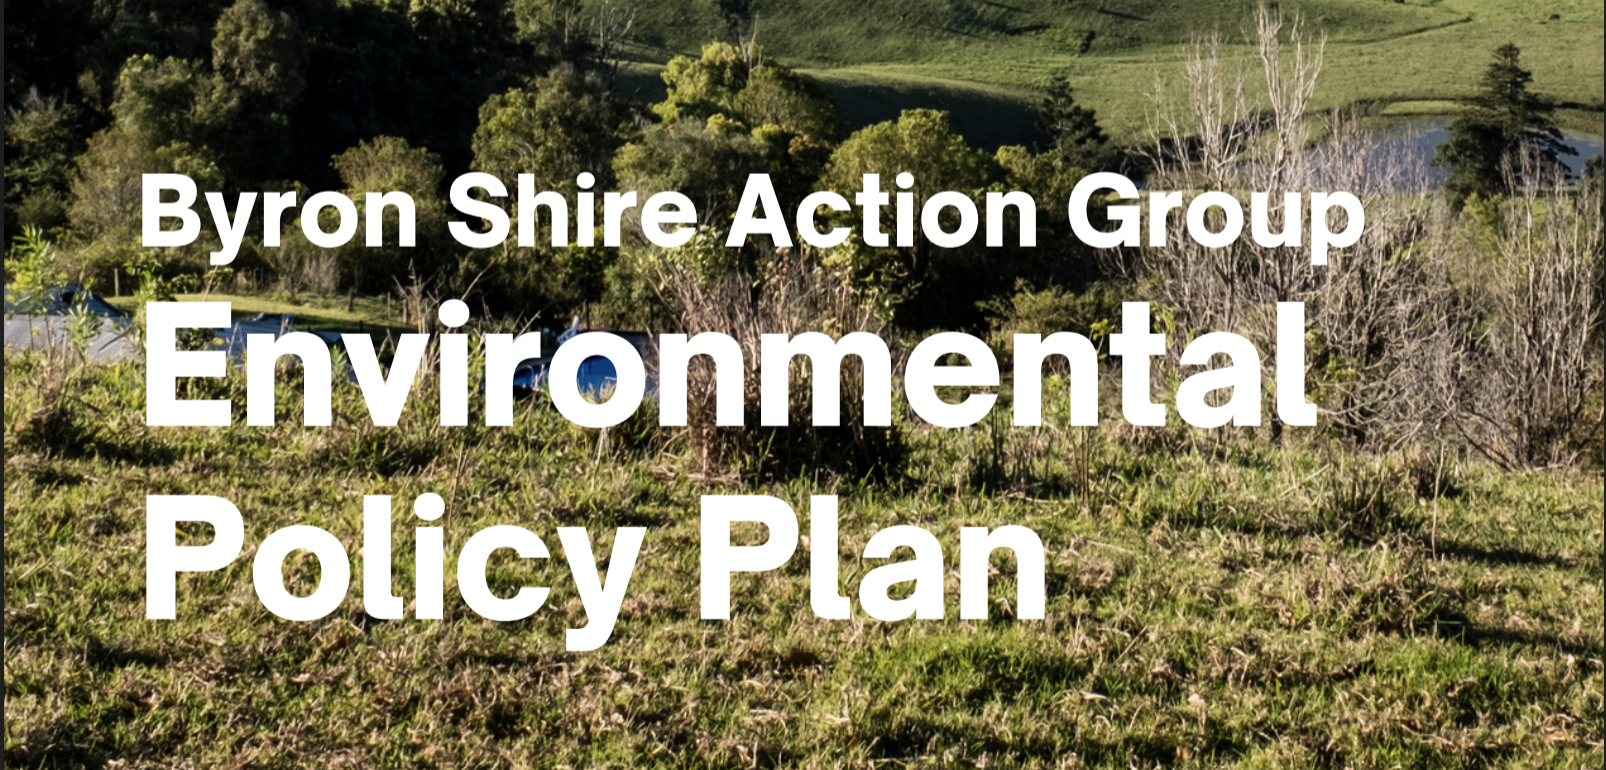 Byron Shire Action Group Calls for an Expedited Net Zero Emissions Target